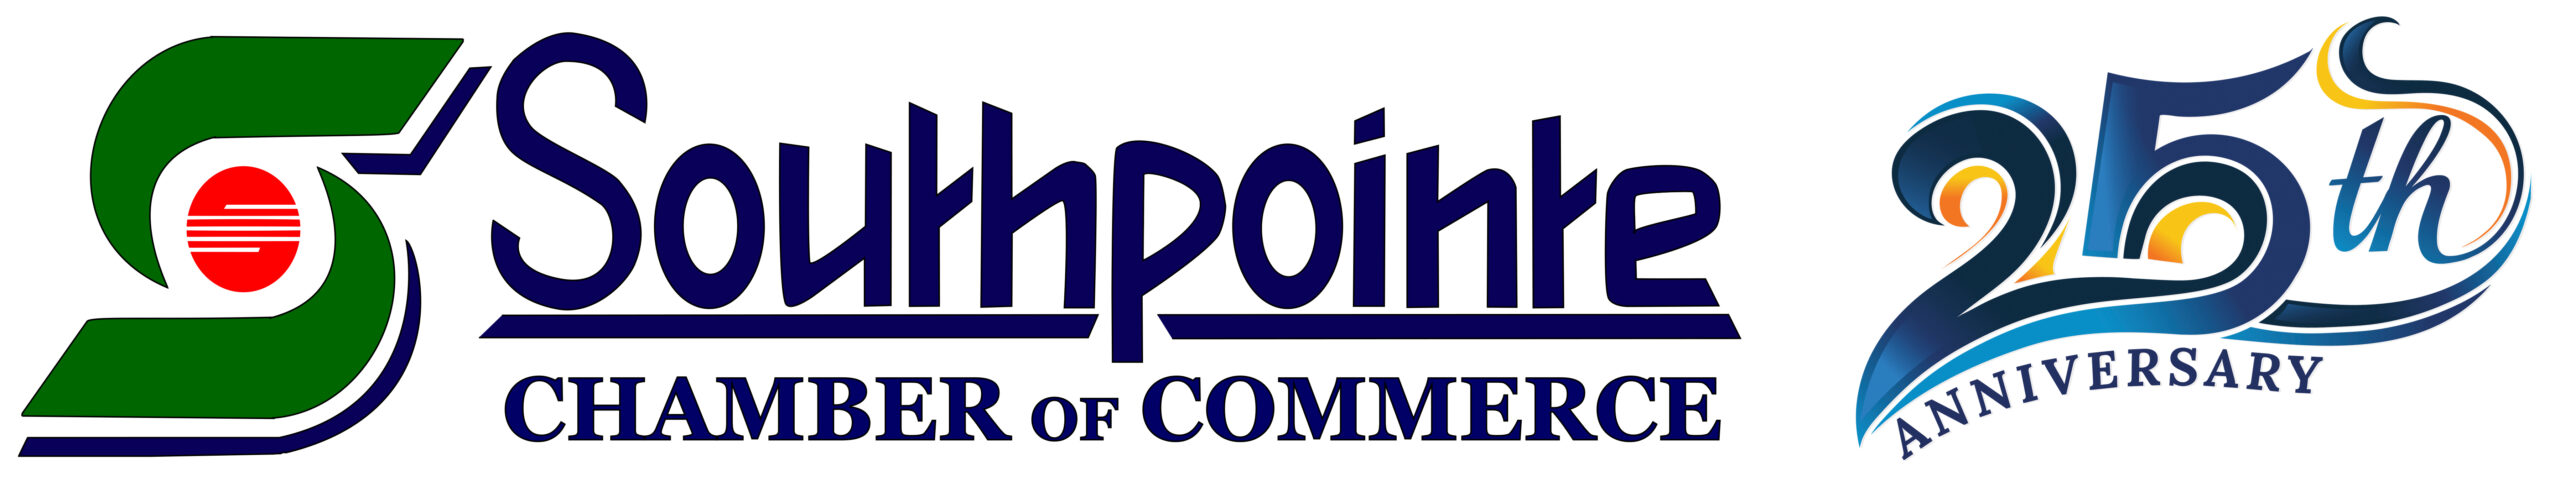 Southpointe Chamber of Commerce